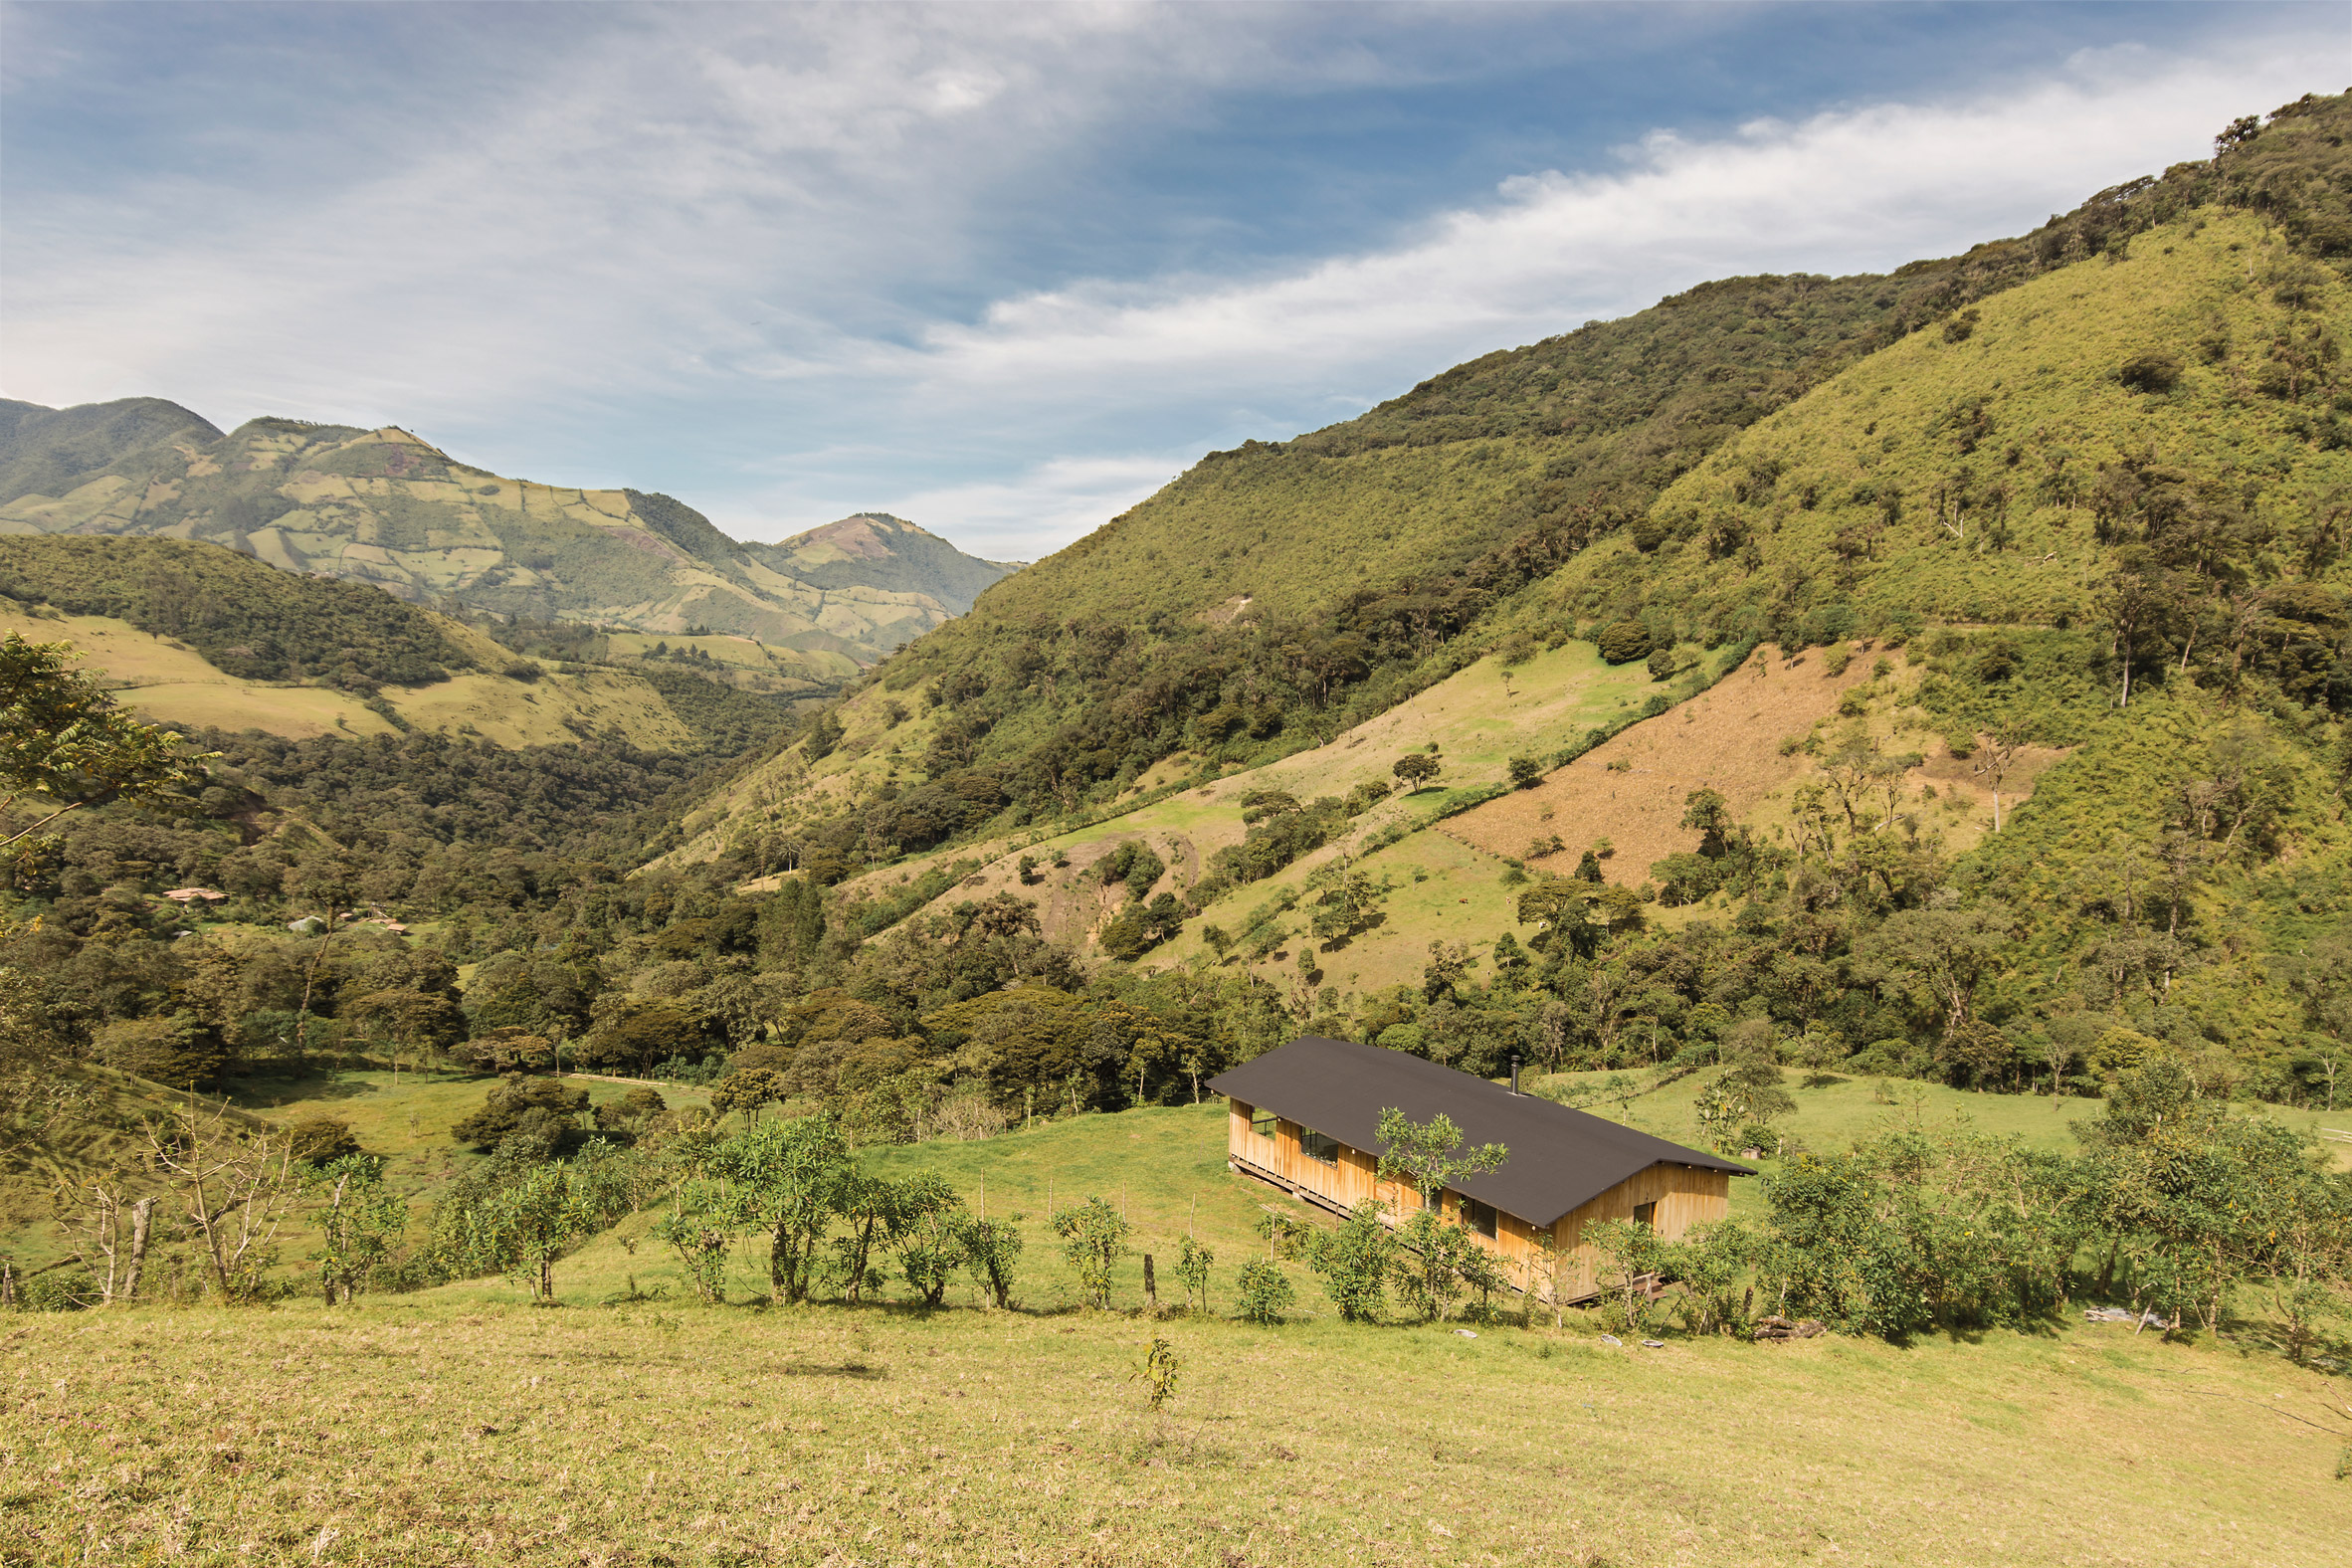 Casa Ocal viewed in the mountains